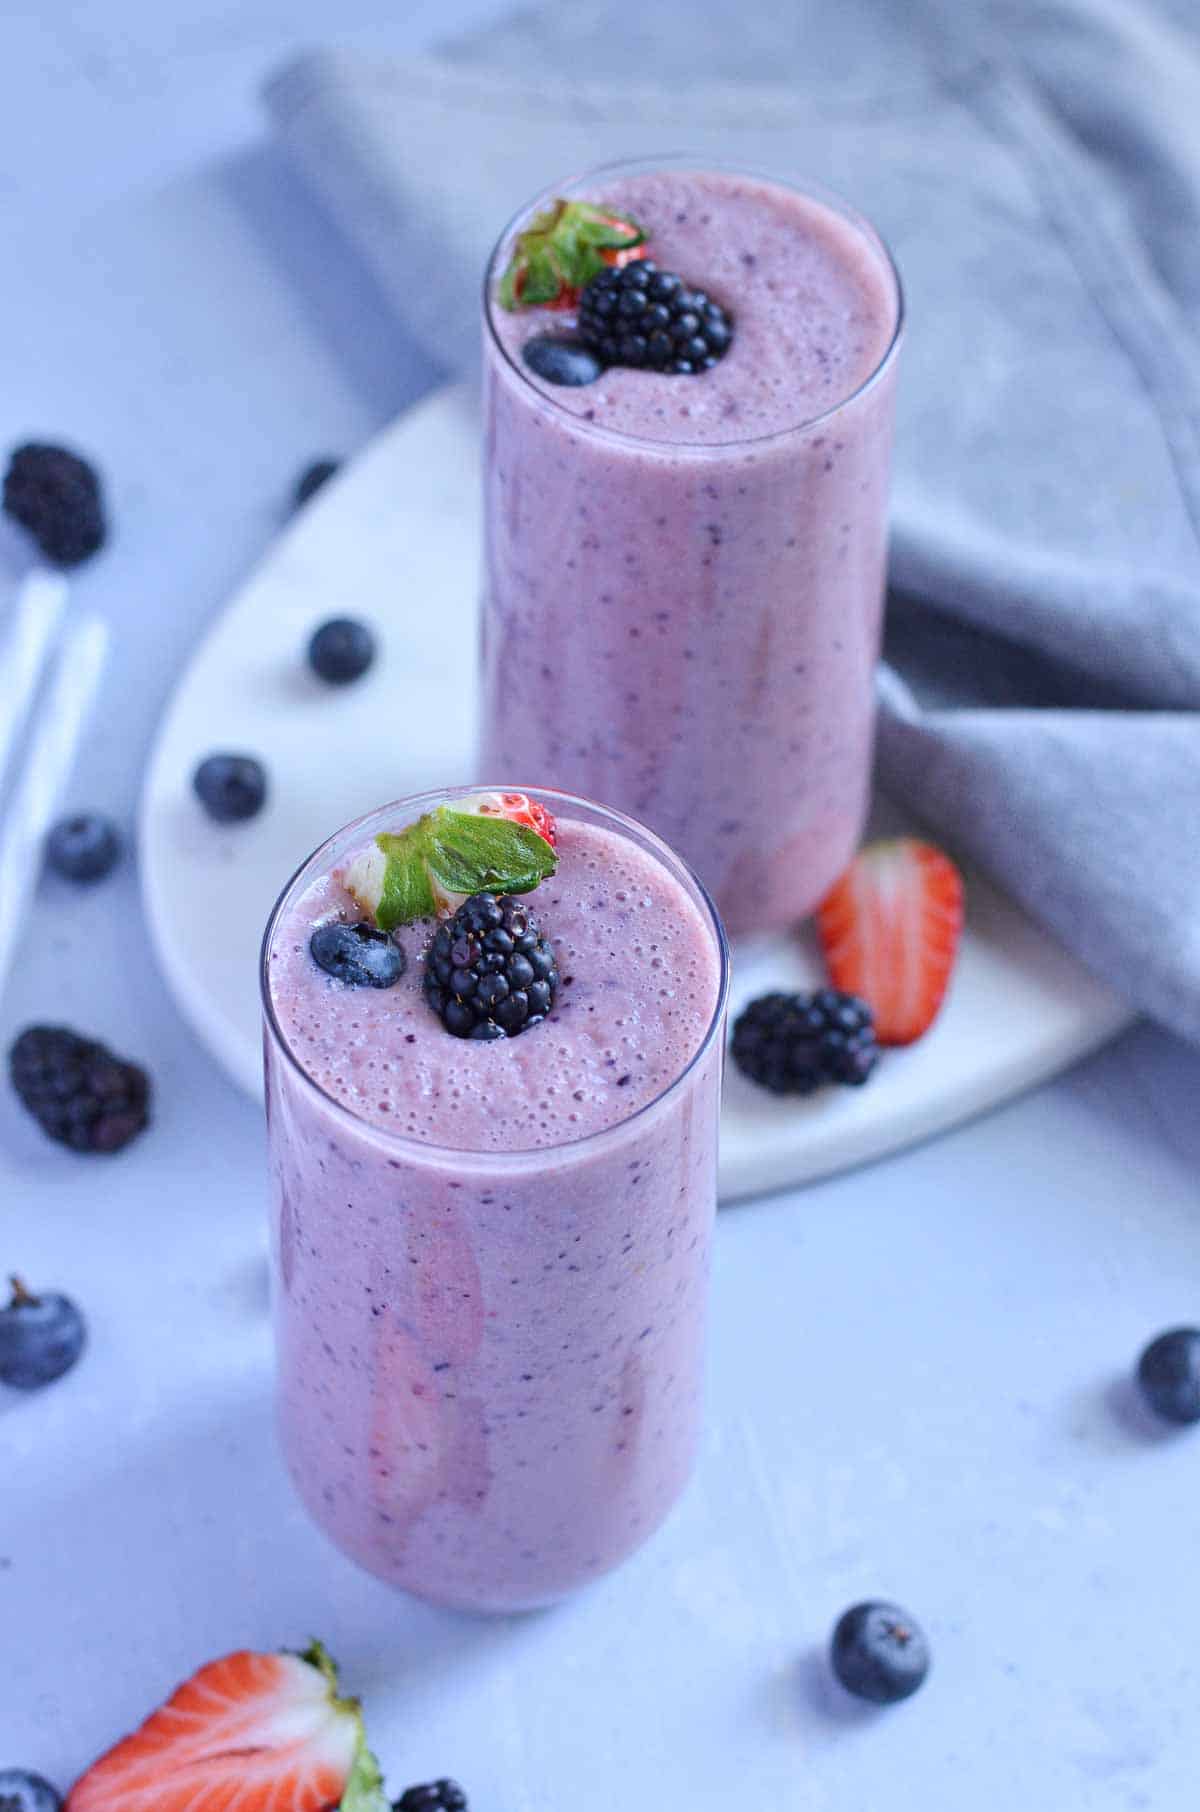 triple berry smoothie served in two glasses, garnished with blackberry.